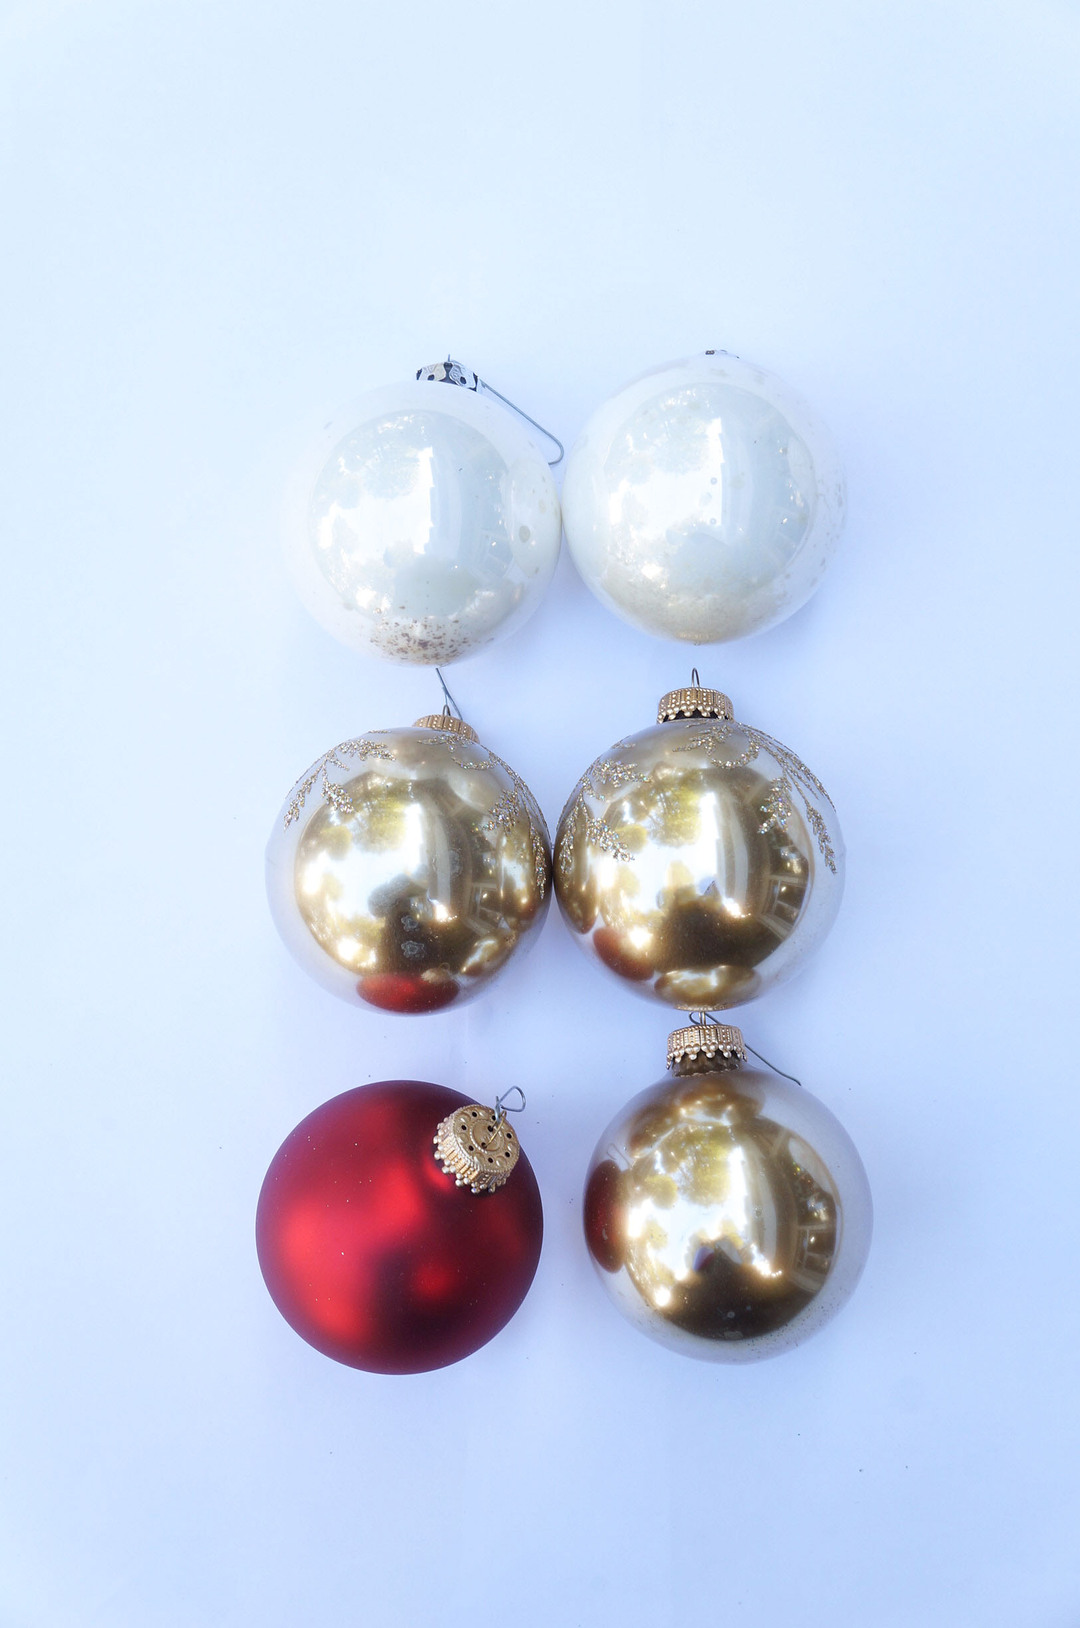 Vintage Blown Glass Christmas Ball Ornament/ヴィンテージ クリスマス オーナメント 吹きガラス ボール レトロ 6個セット 8